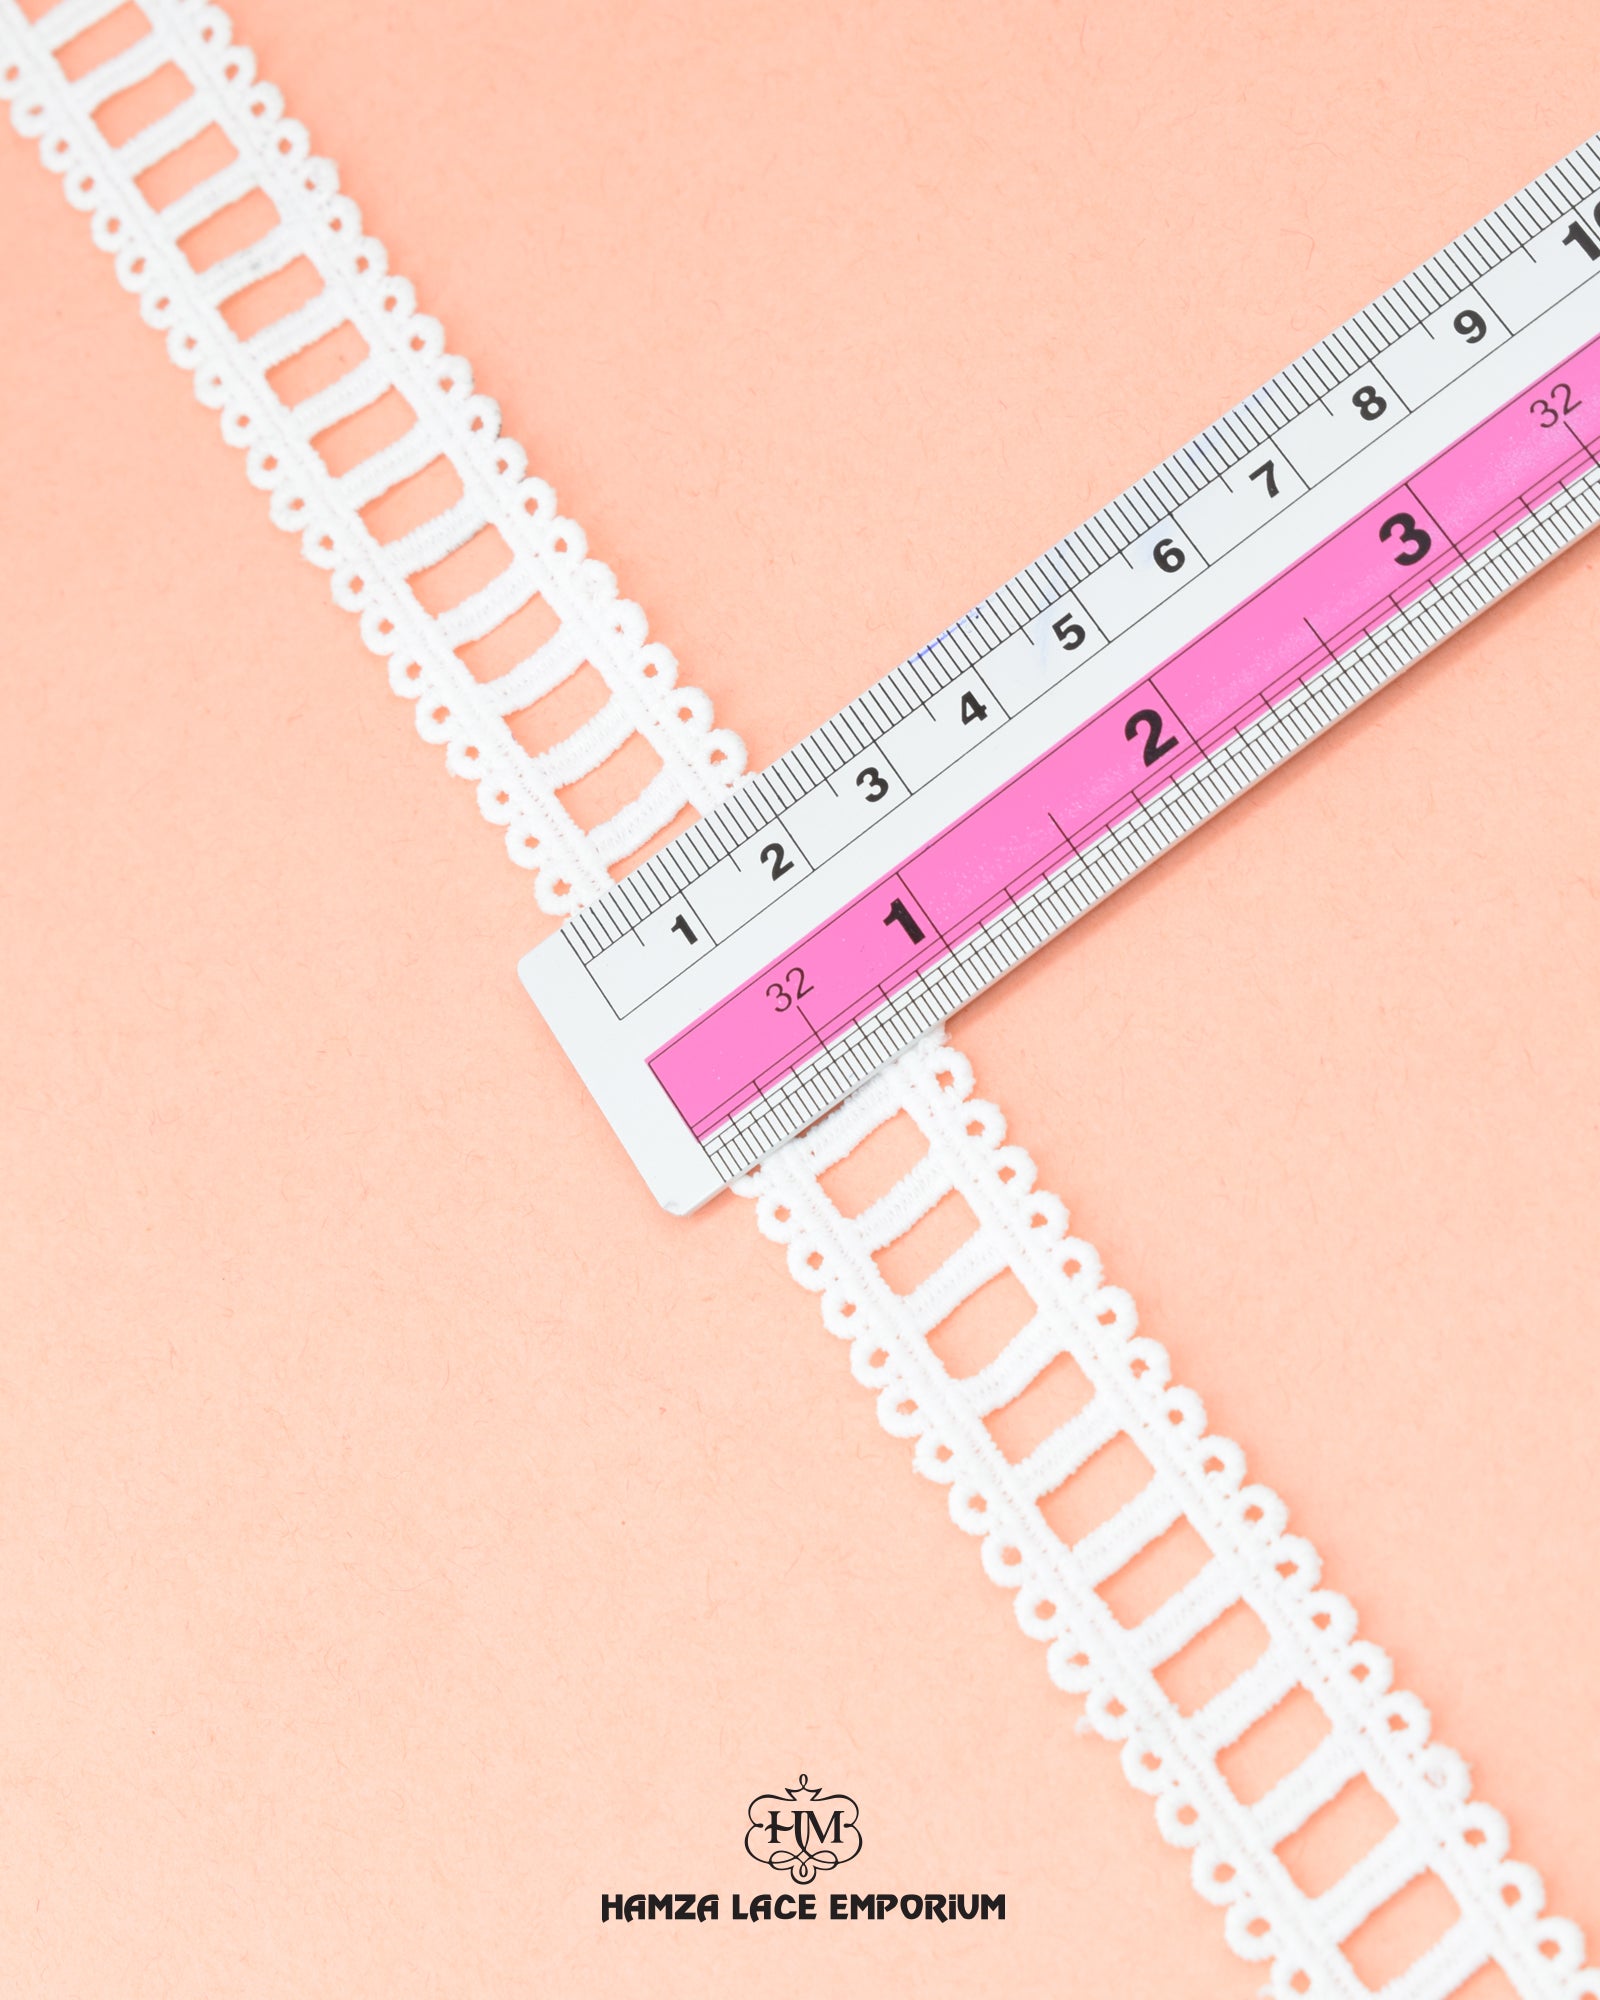 The 'Two Side Ladder Lace 21828' size is given by placing ruler on it